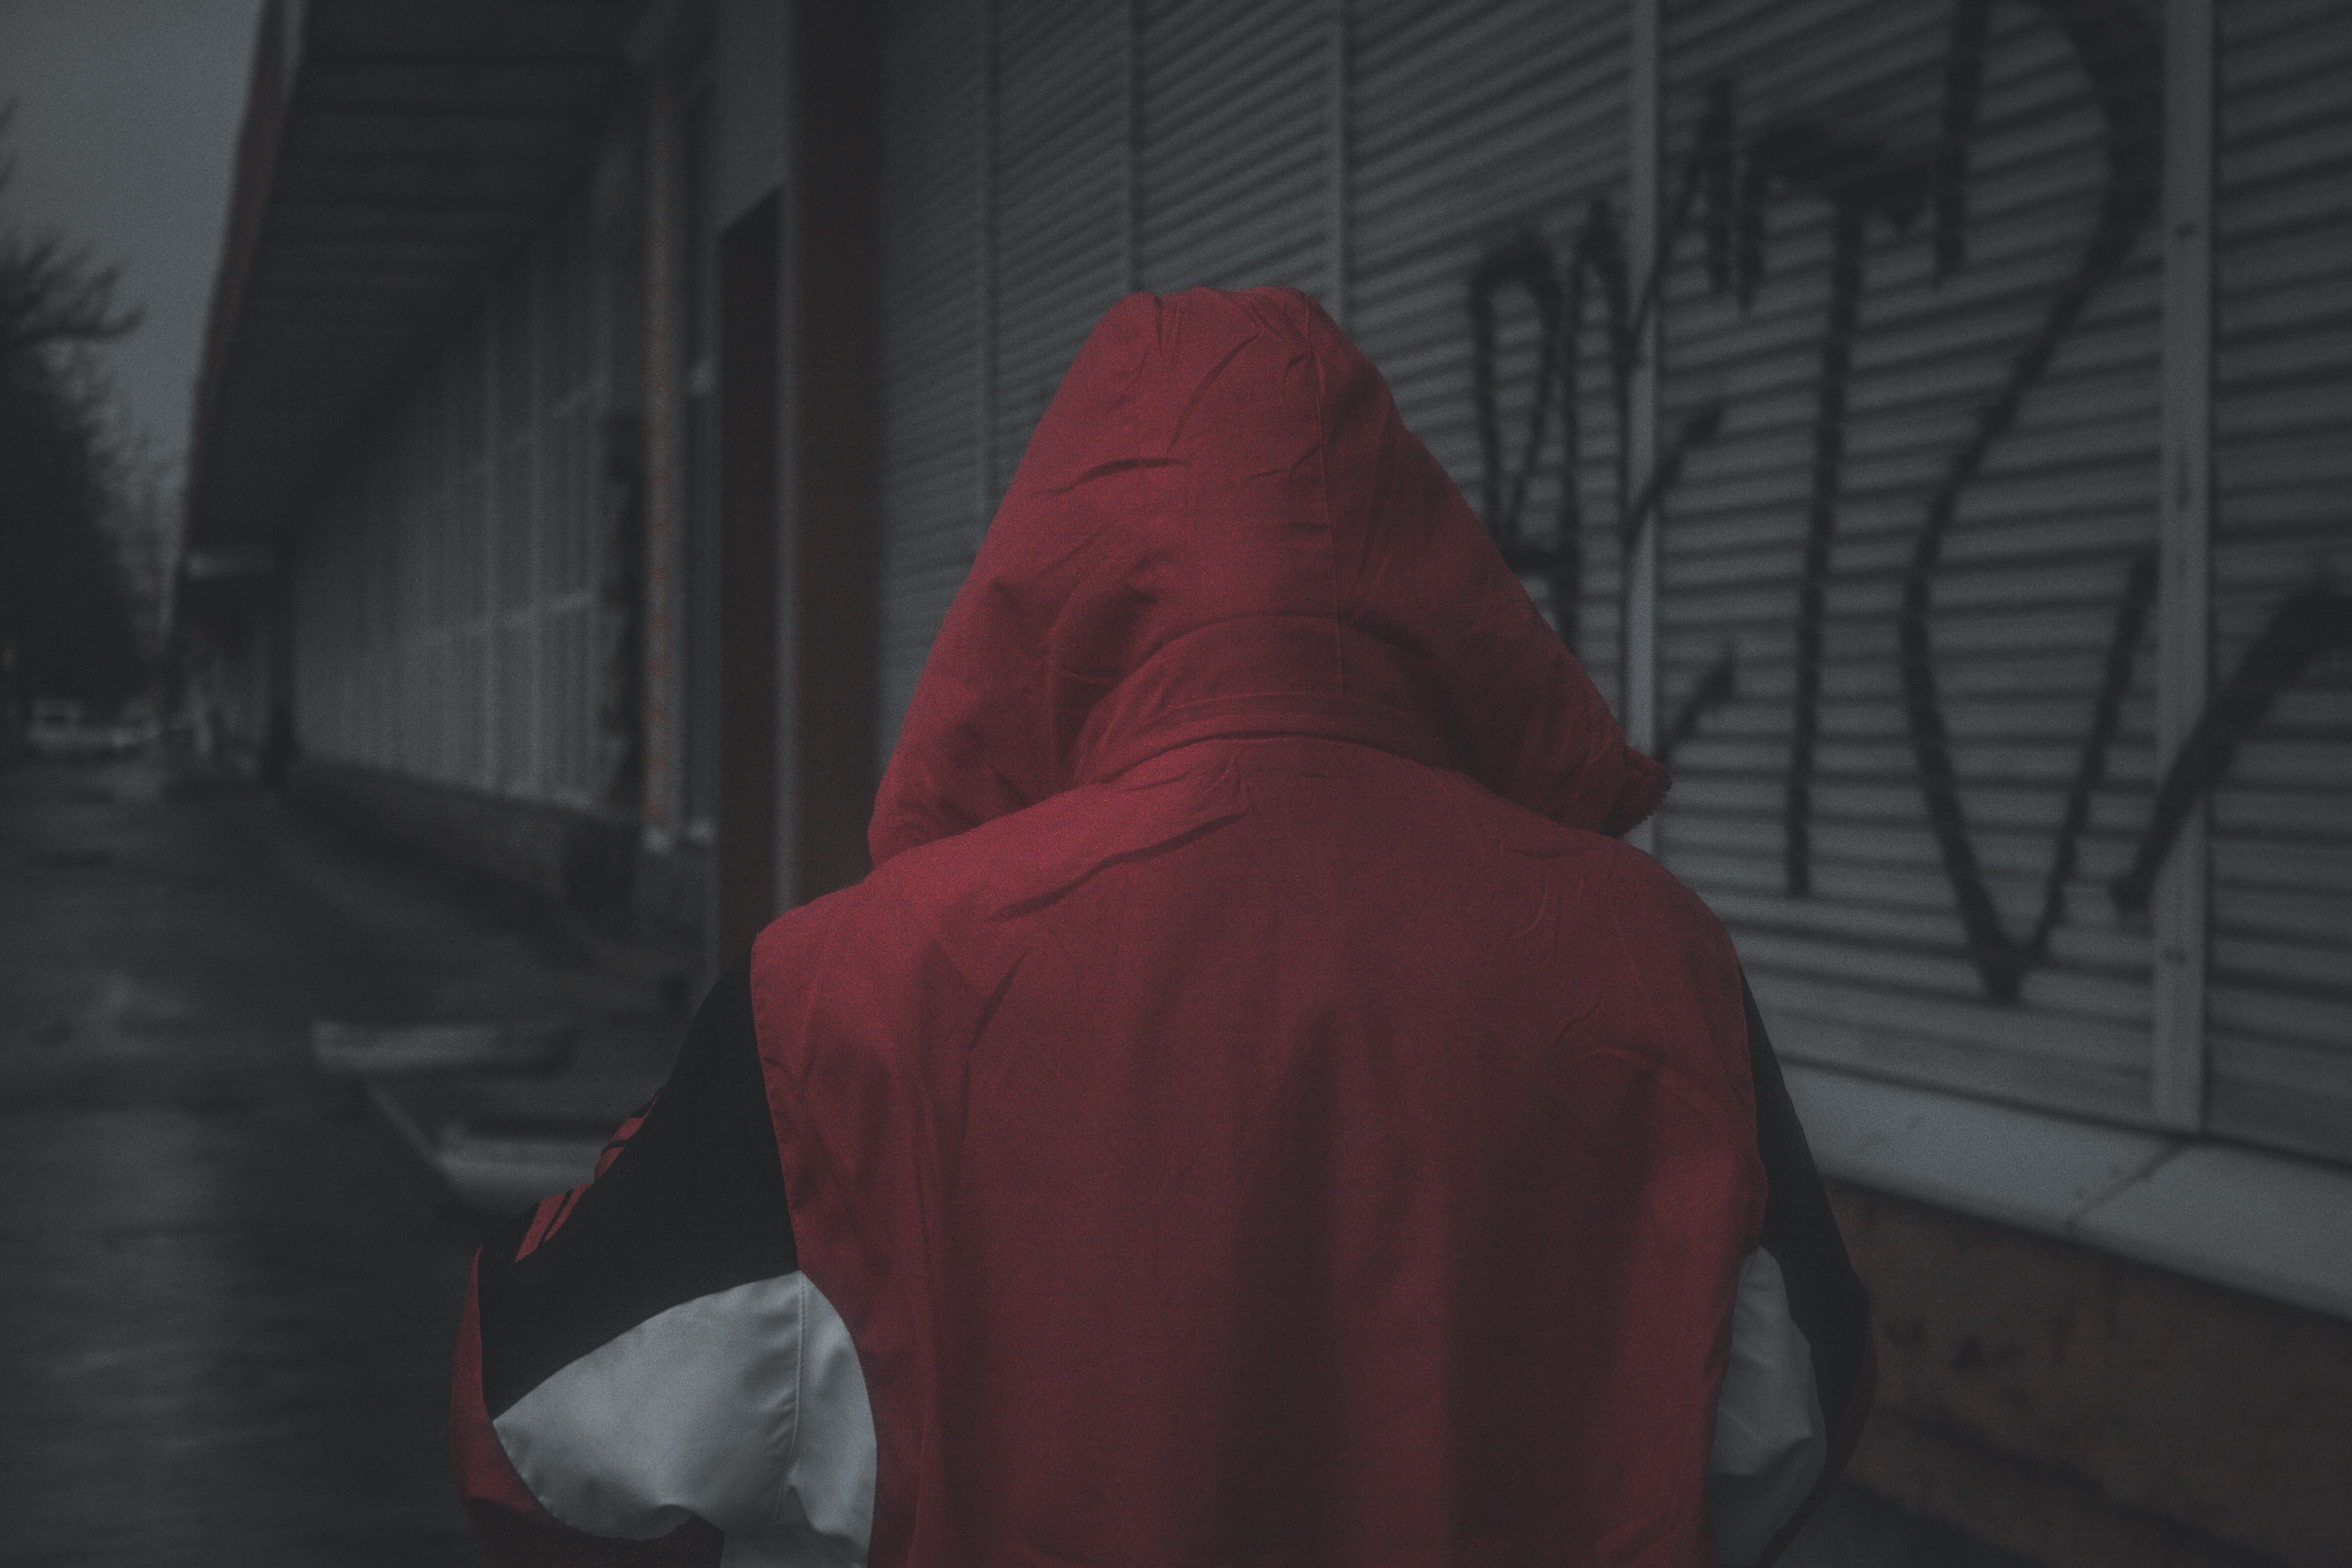 Young man in red hoodie; image by Vlad, via Unsplash.com.